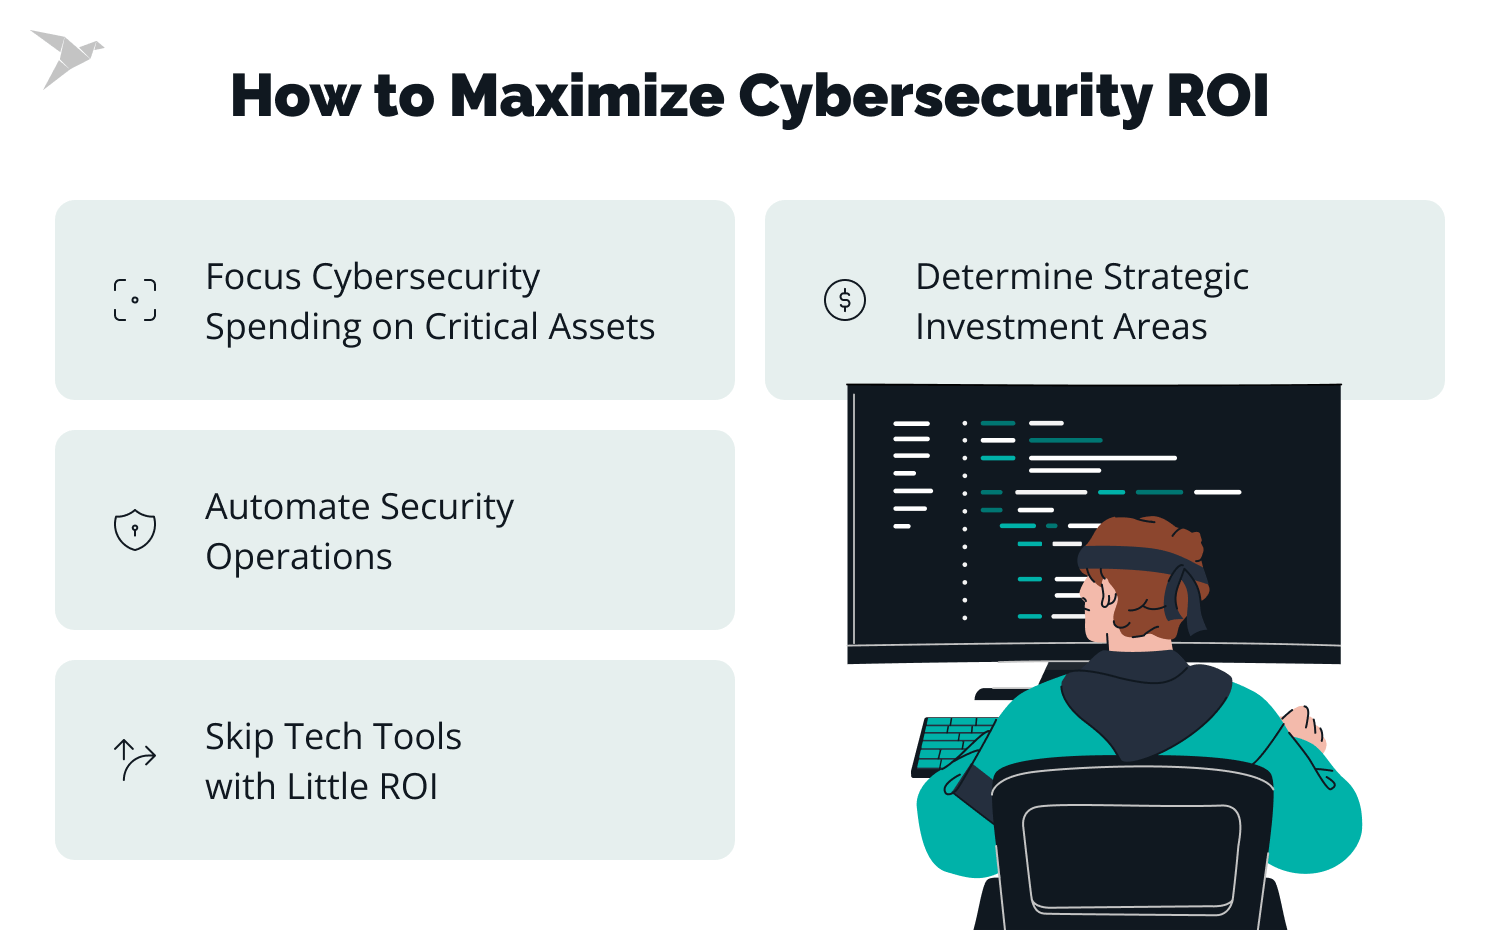 How to maximize cybersecurity ROI